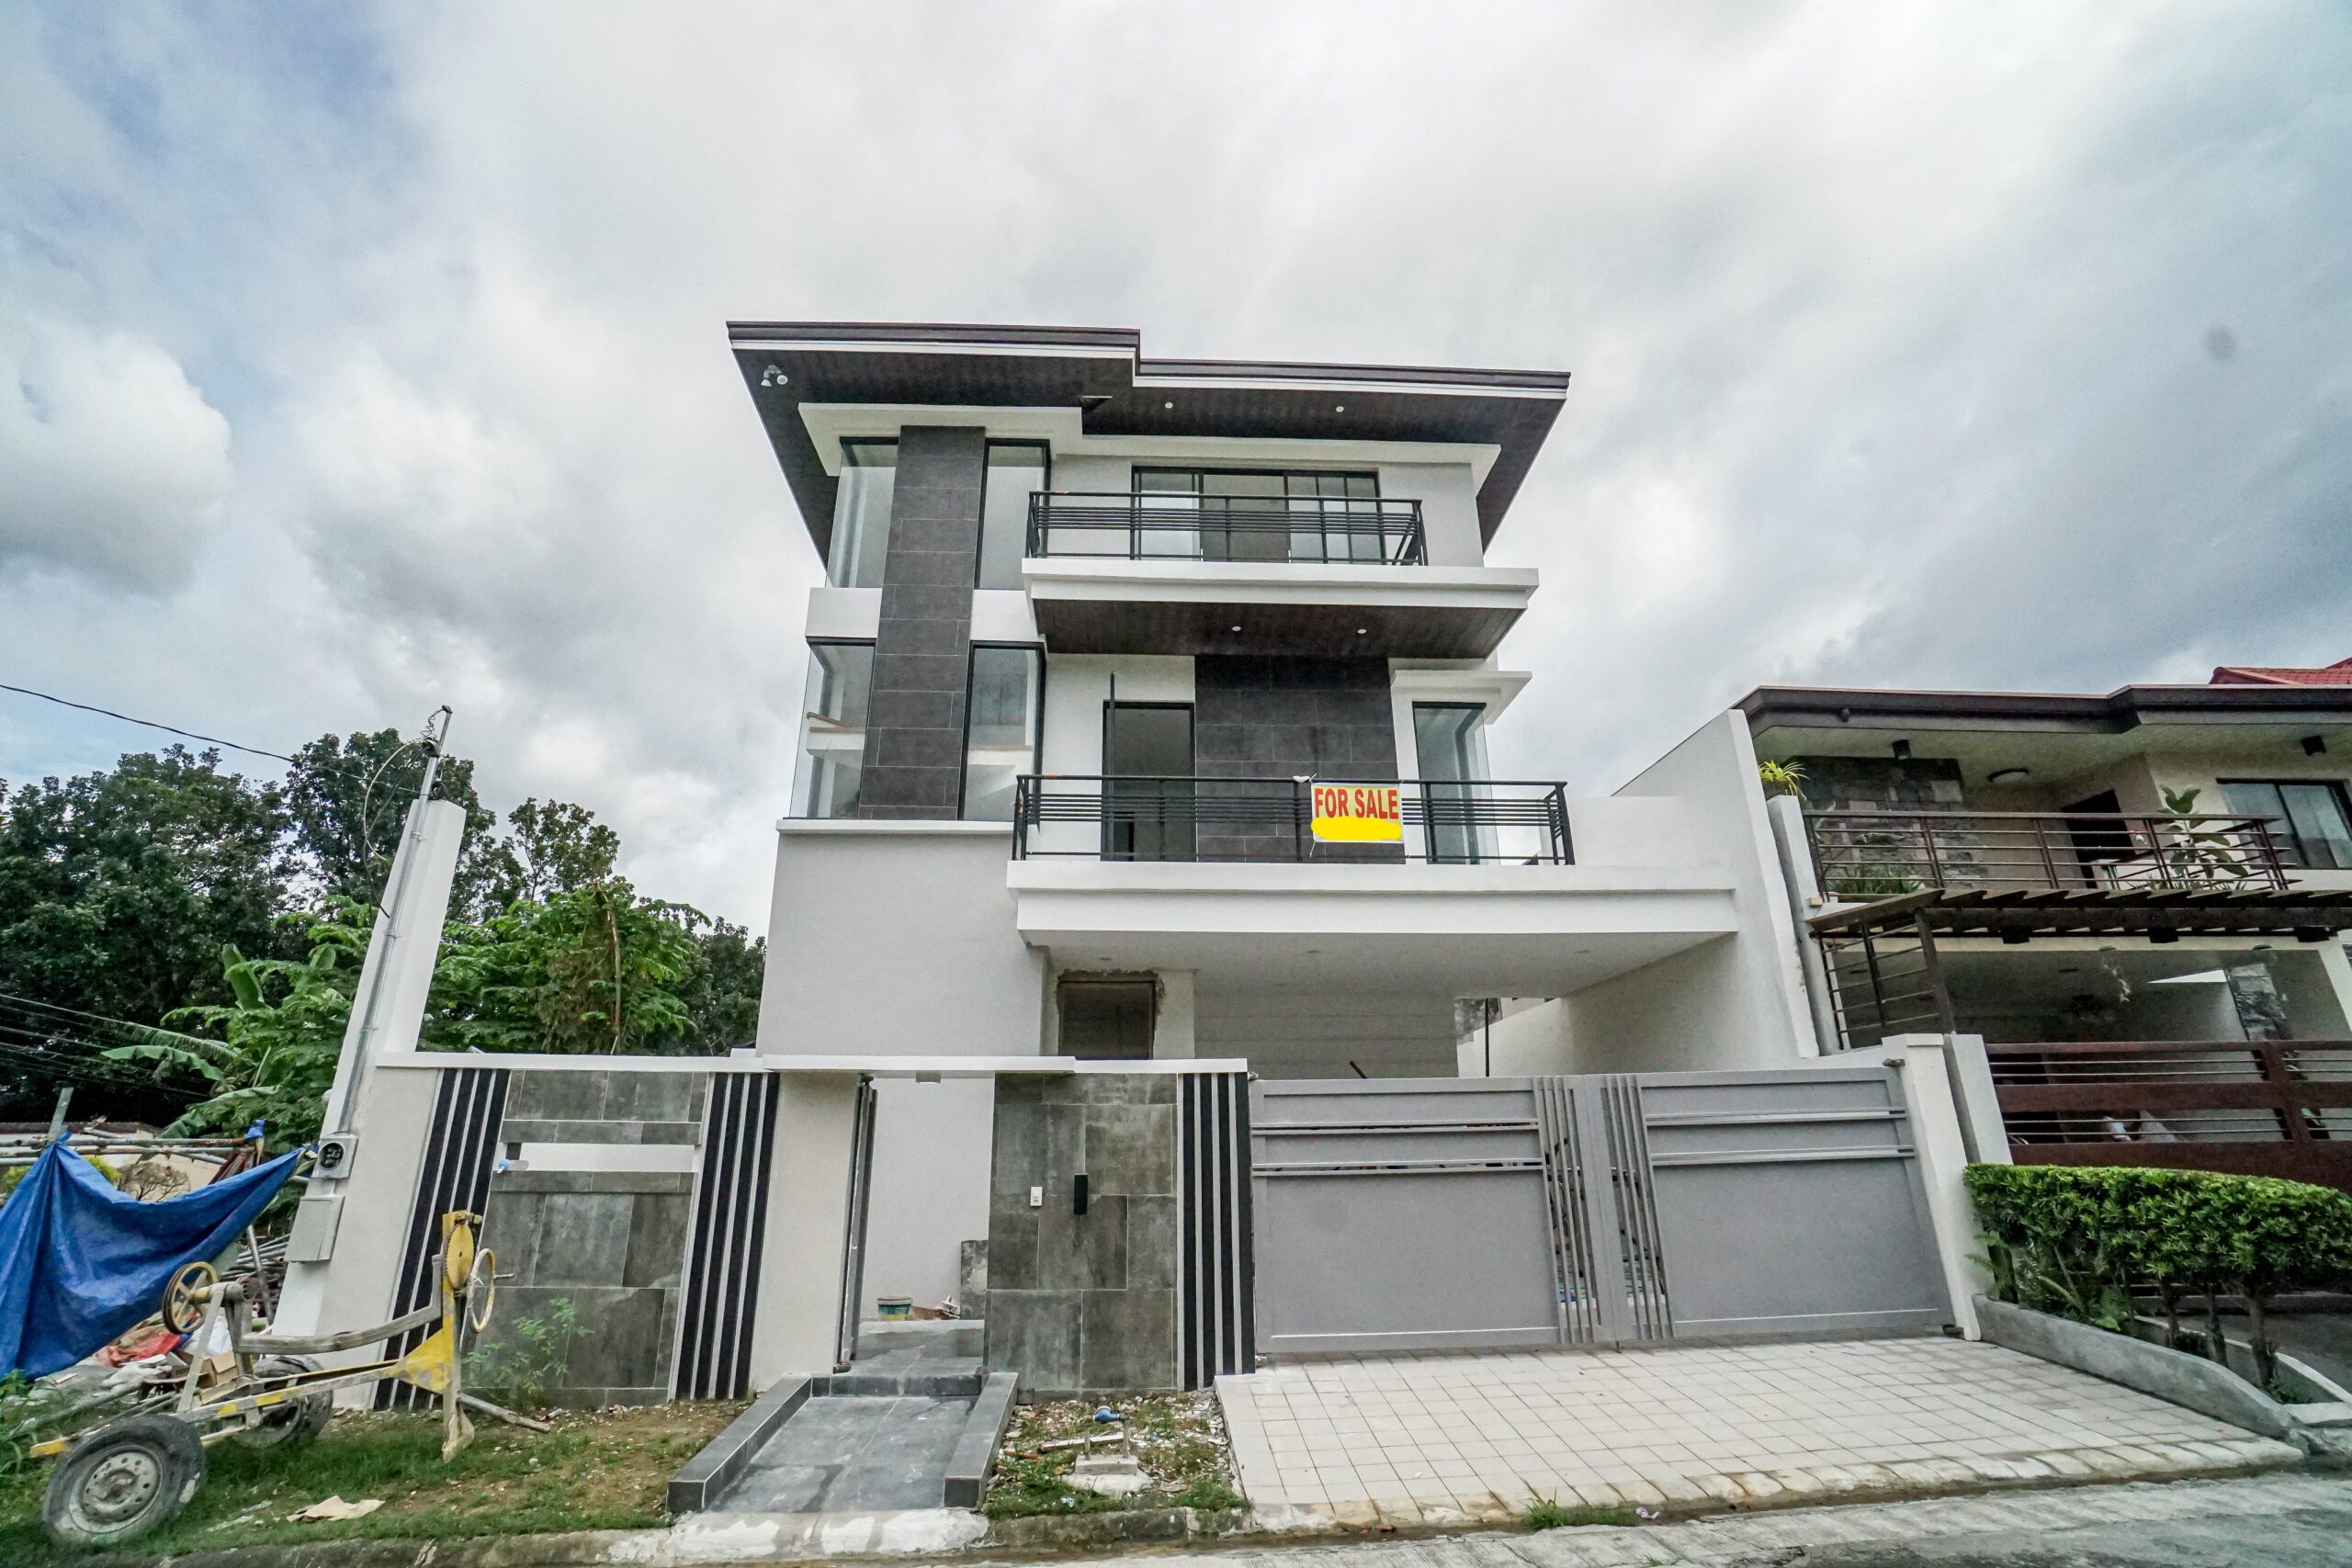 For Sale Brand New 3-Story House and Lot located in Filinvest 2, Quezon City